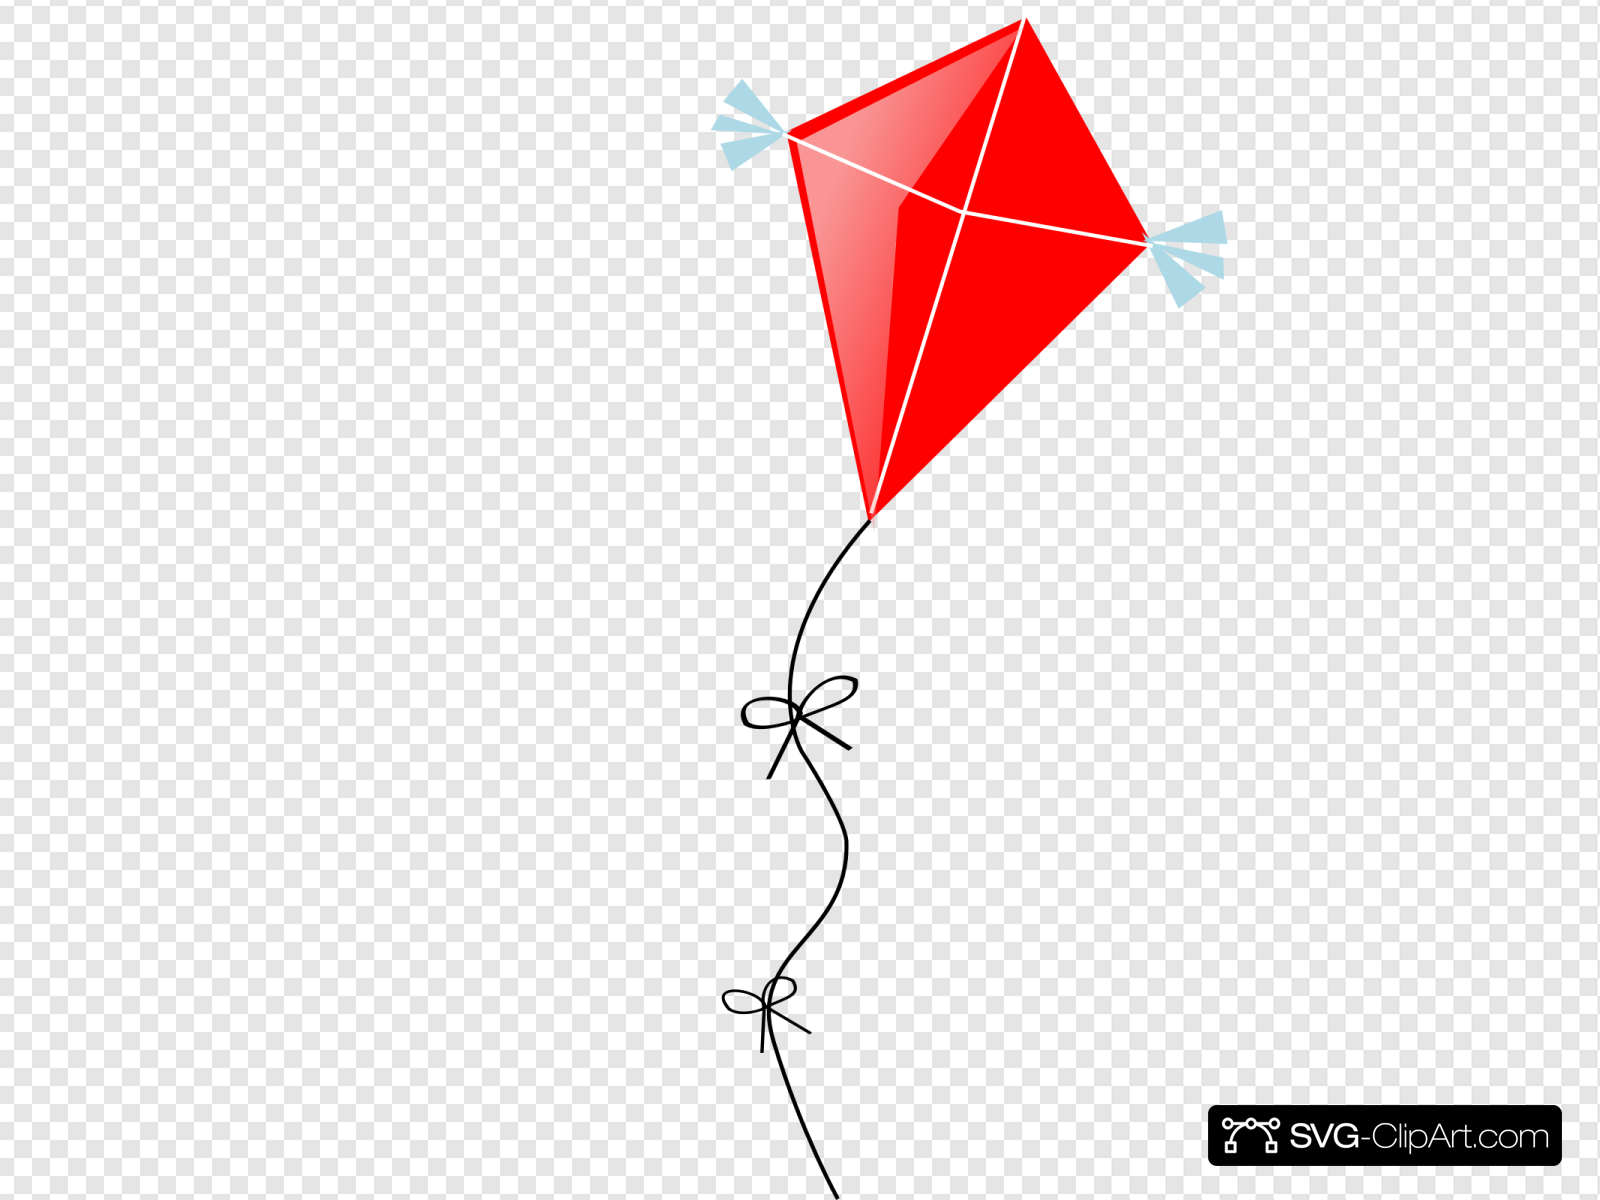 Red Kite Clip art, Icon and SVG